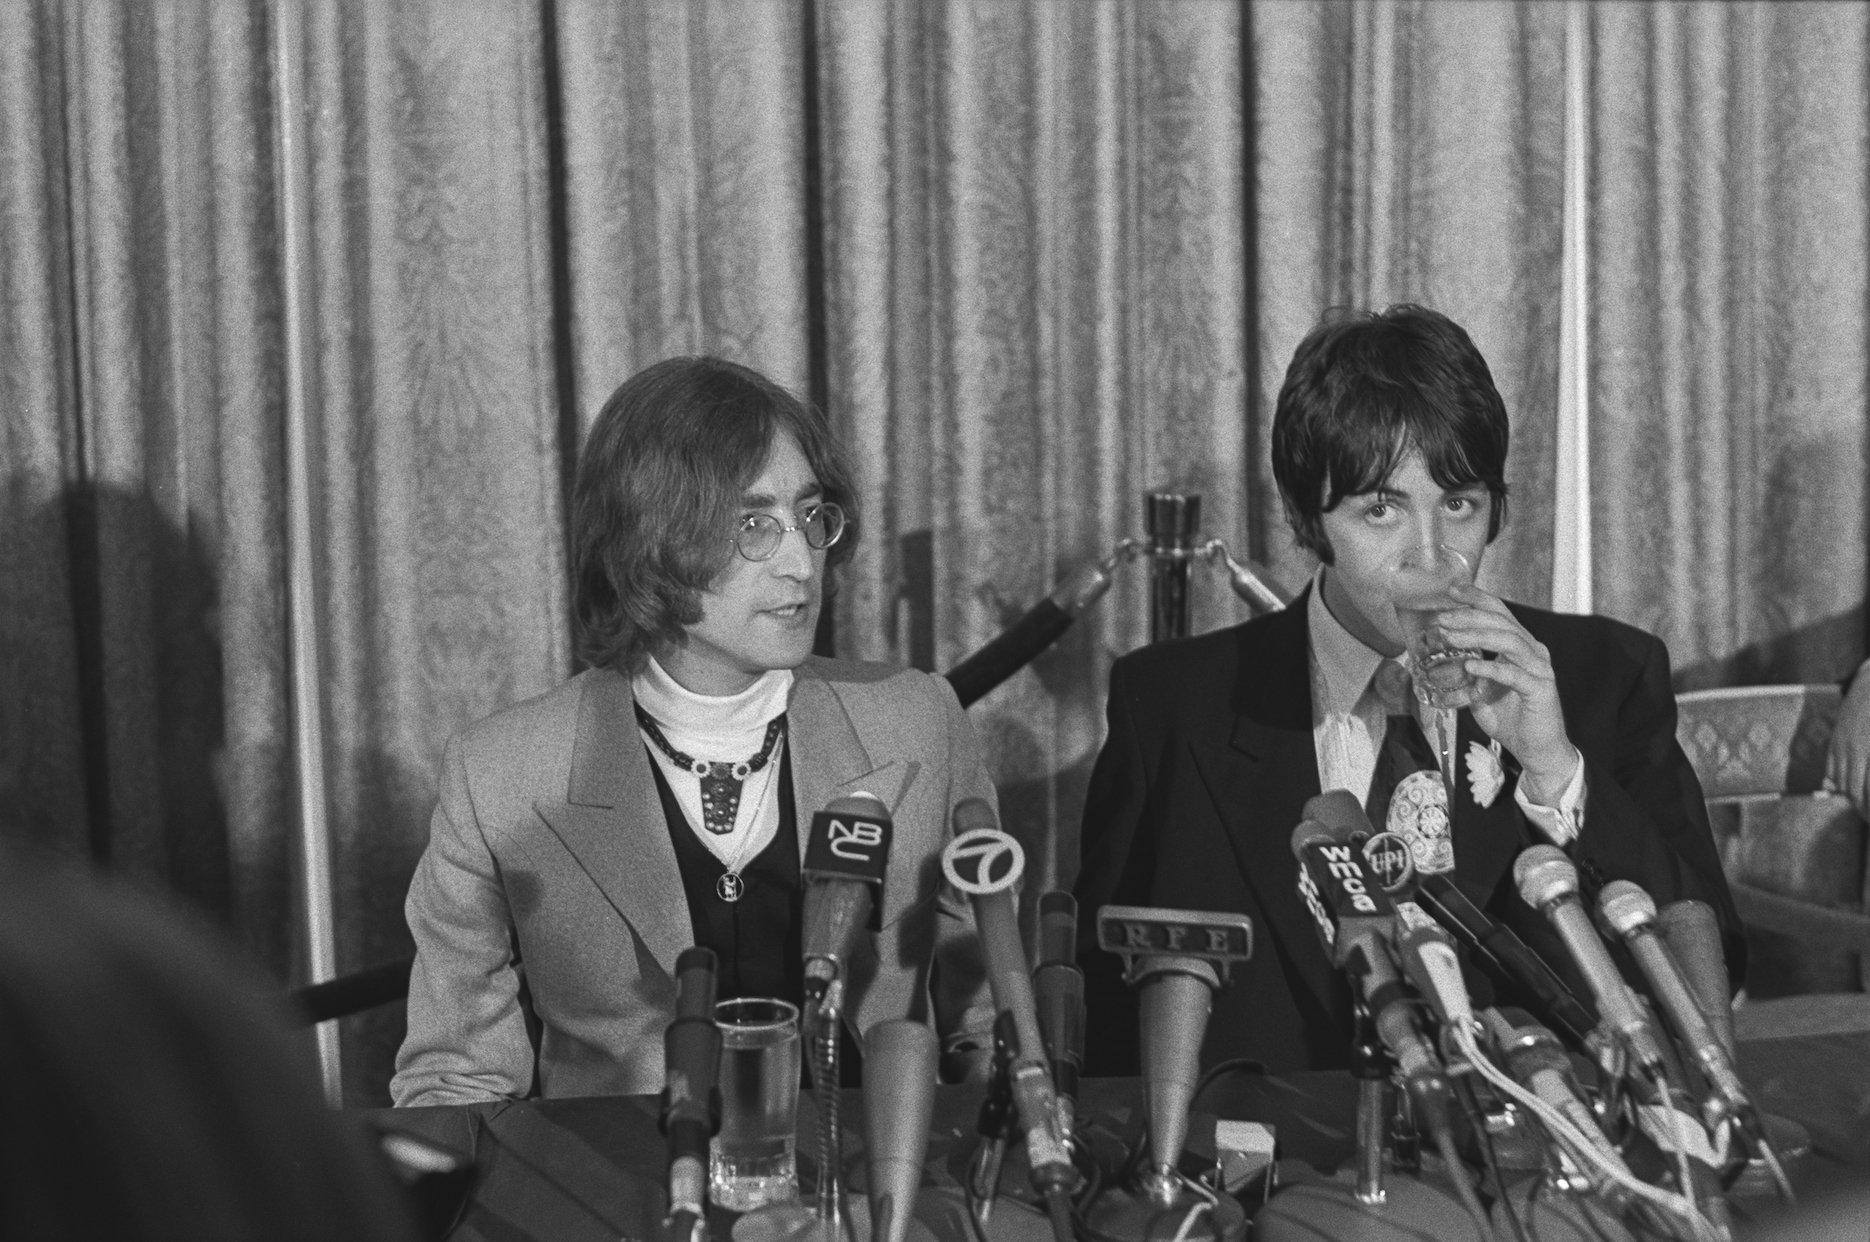 John Lennon and Paul McCartney hold a press conference to announce The Beatles new venture Apple Corps